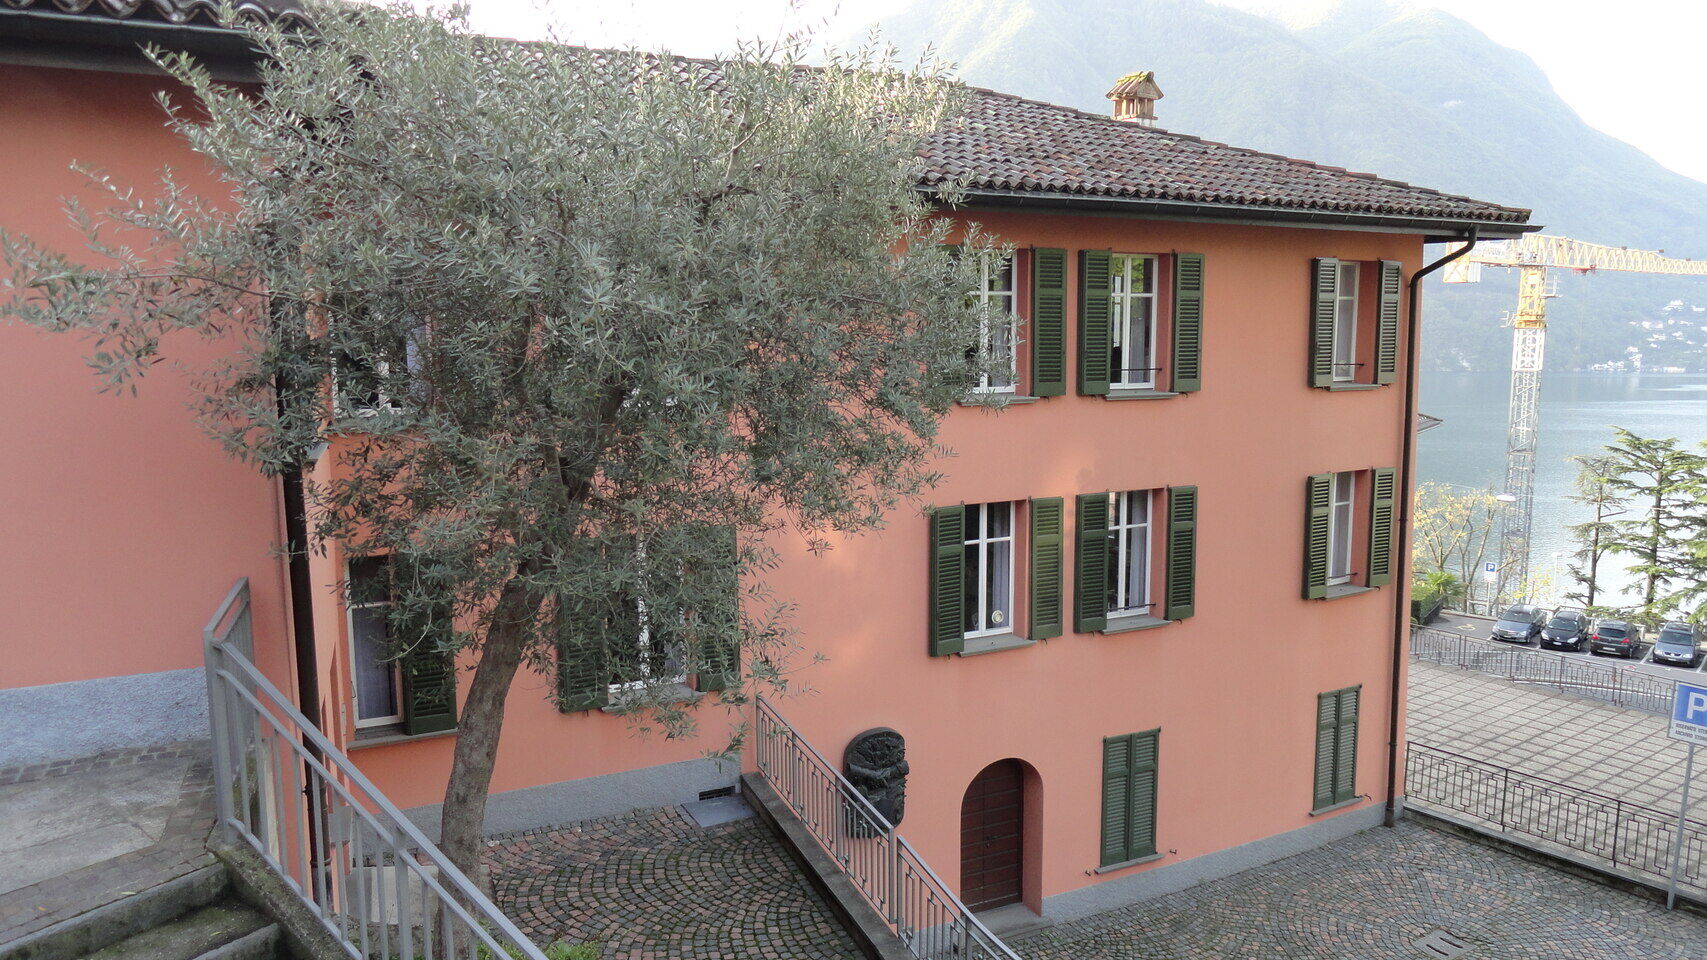 Human and natural sciences: Casa Carla Cattaneo in Castagnola, in the territory of the Municipality of Lugano, in Canton Ticino: it will host the IBSA Foundation for Scientific Research, which sets itself new ambitious goals